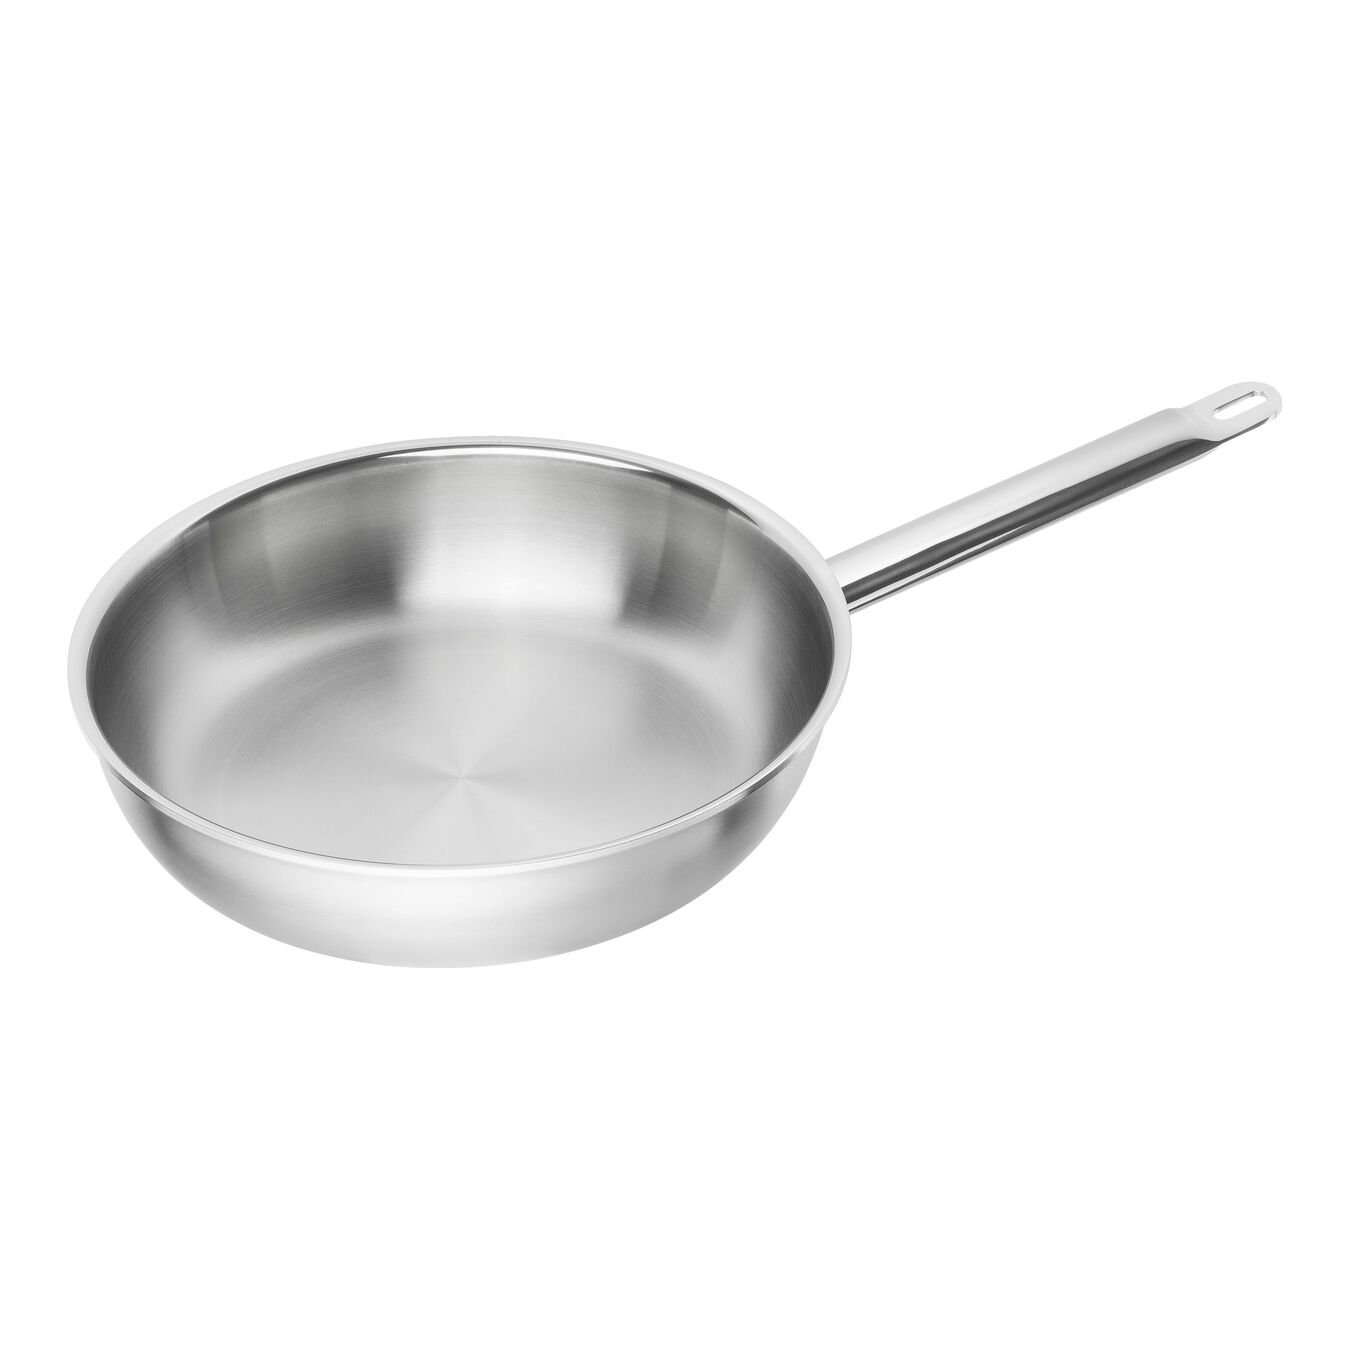 28 cm / 11 inch 18/10 Stainless Steel Frying pan,,large 1